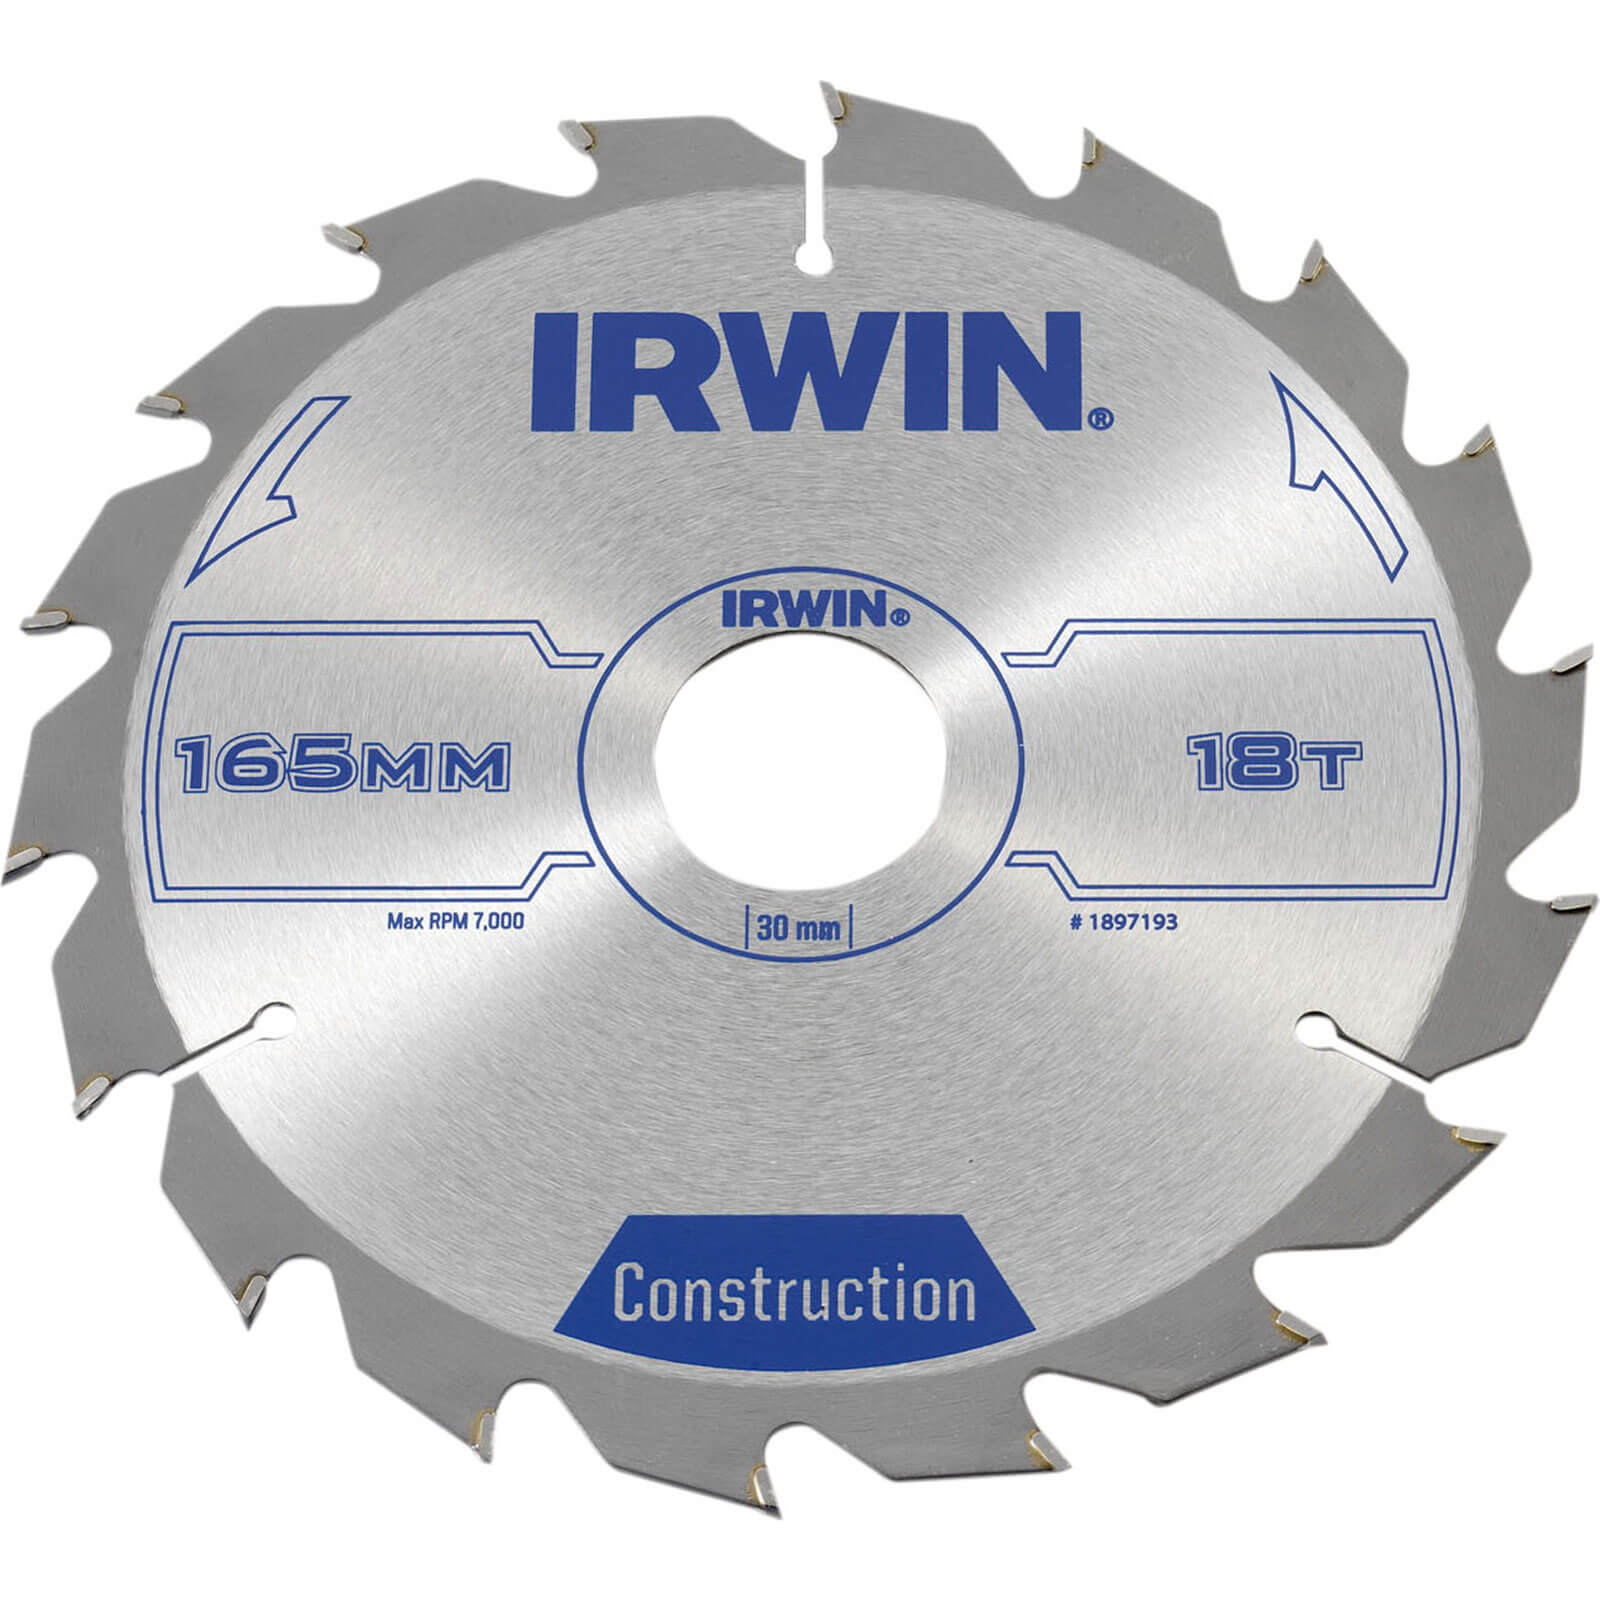 Photo of Irwin Atb Construction Circular Saw Blade 165mm 18t 30mm